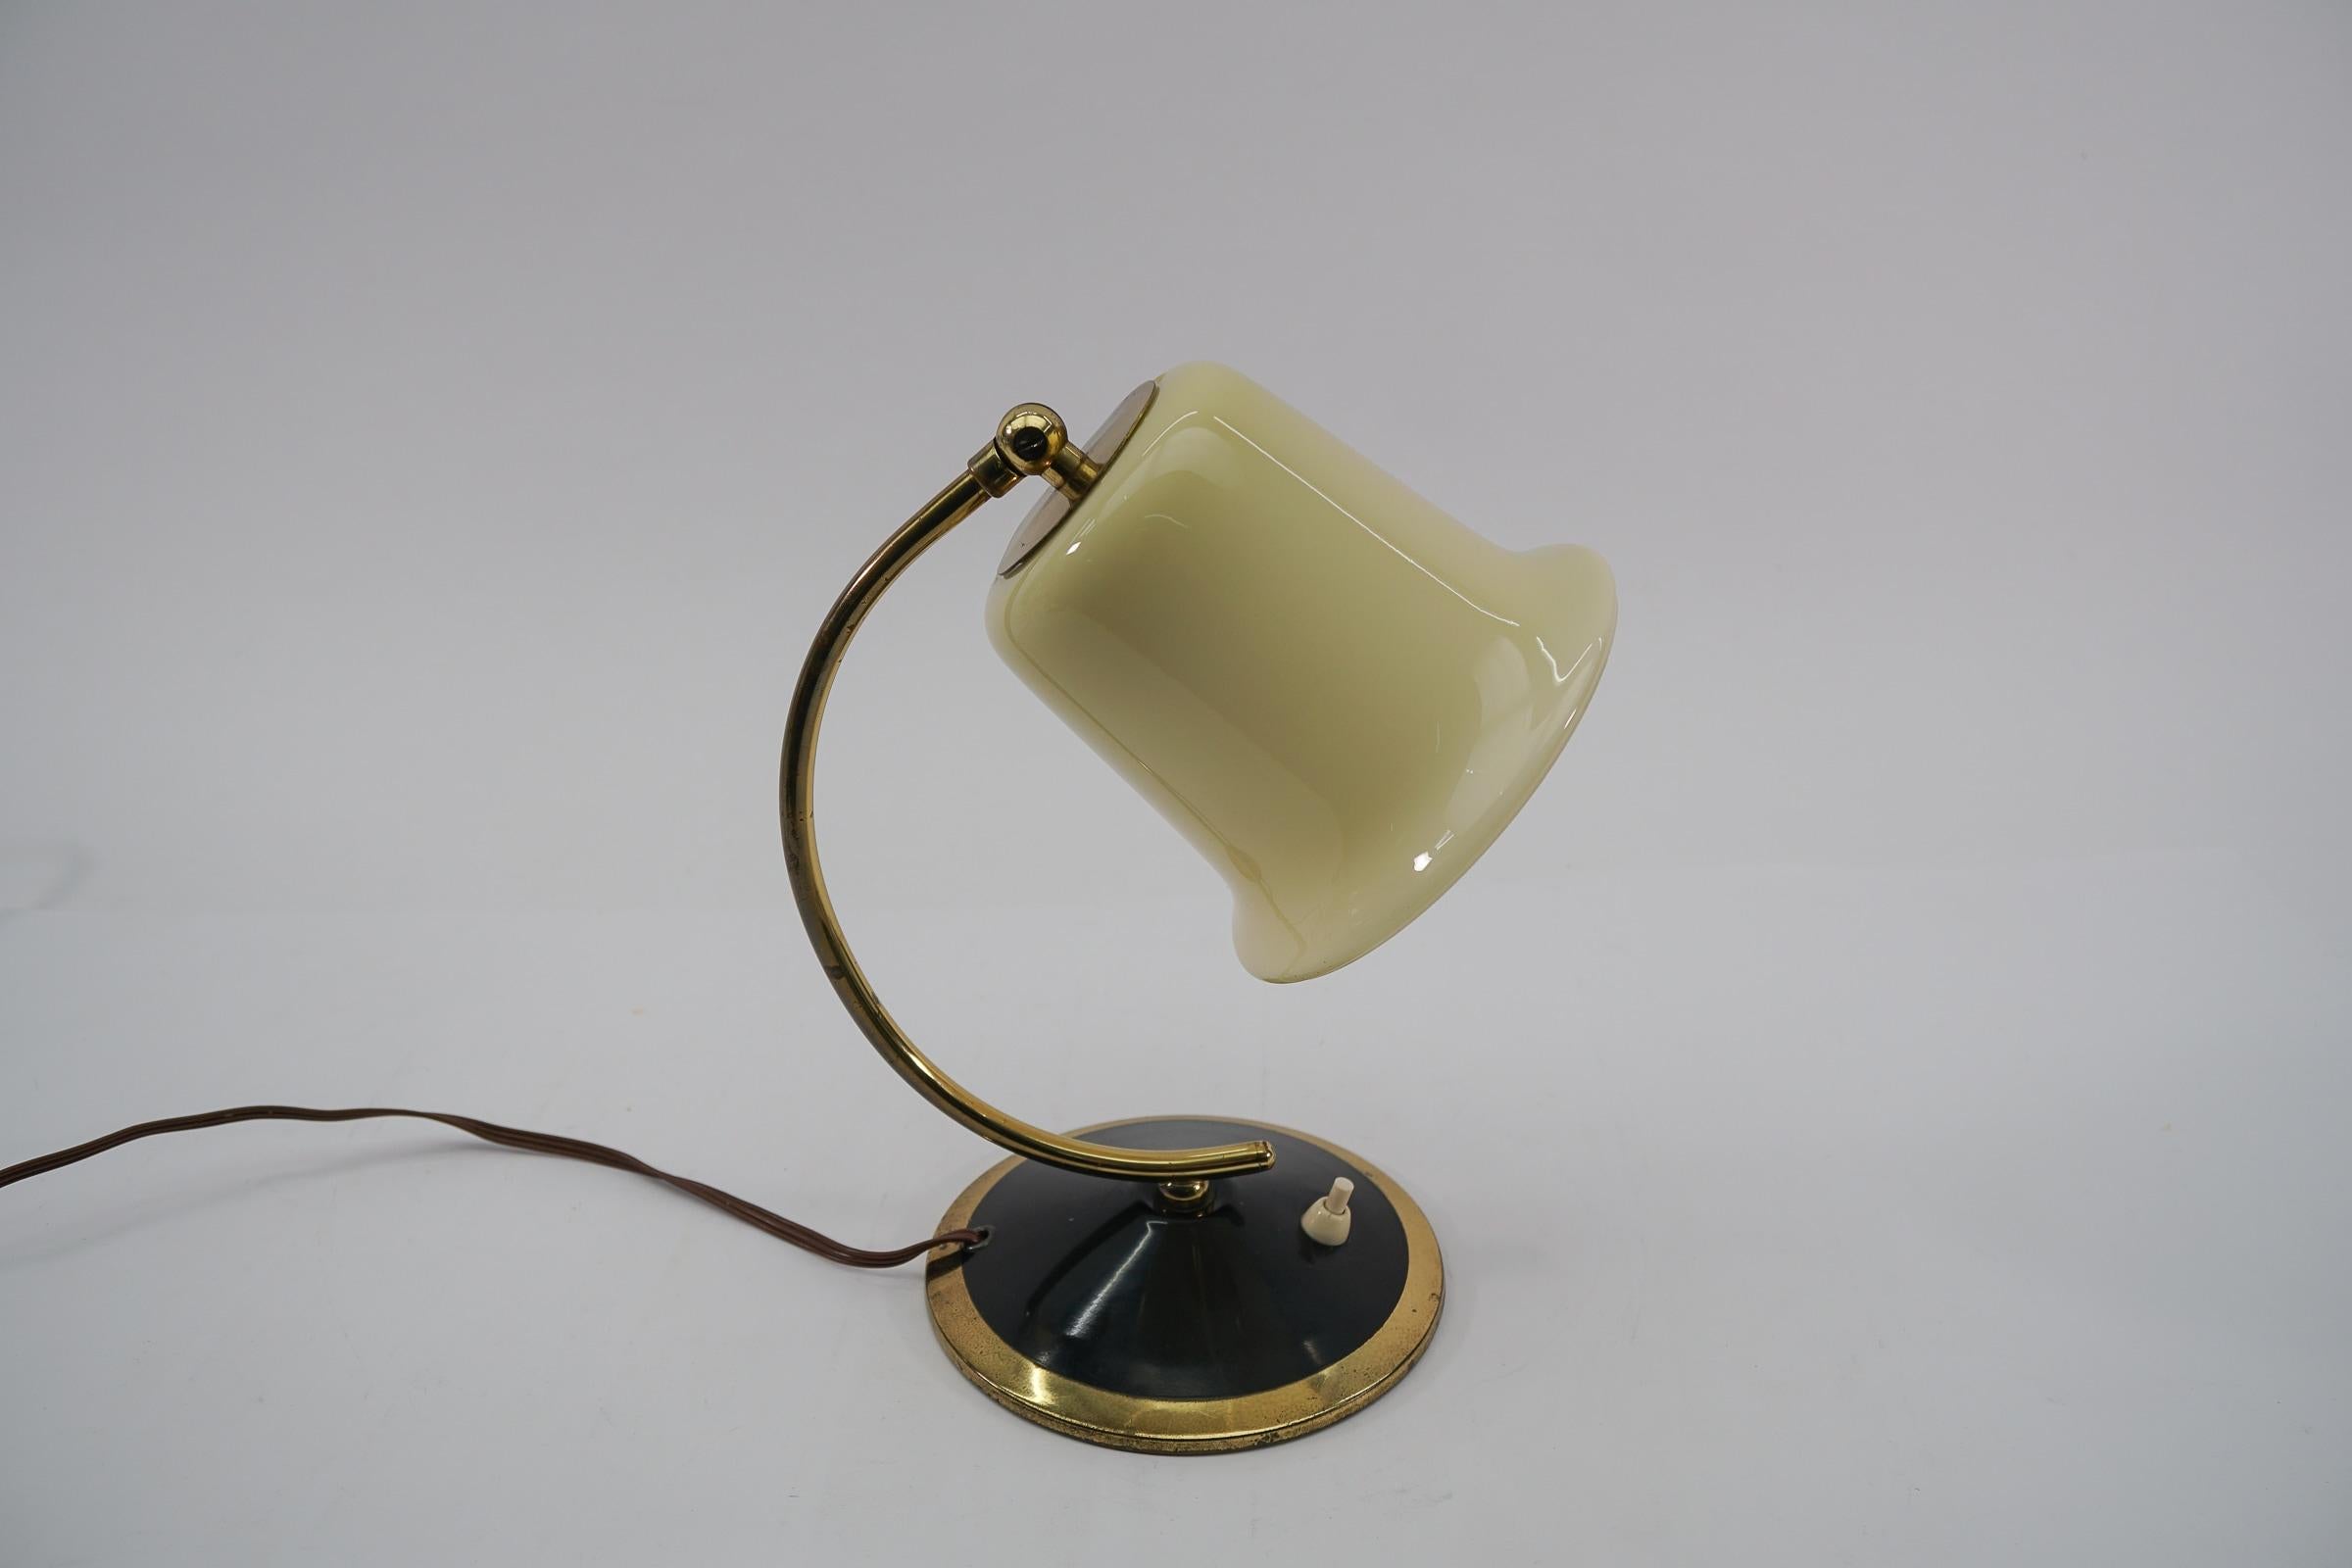 Mid-Century Modern Lovely Midcentury Table Lampe Made in Glass and Brass, 1950s, Austria For Sale